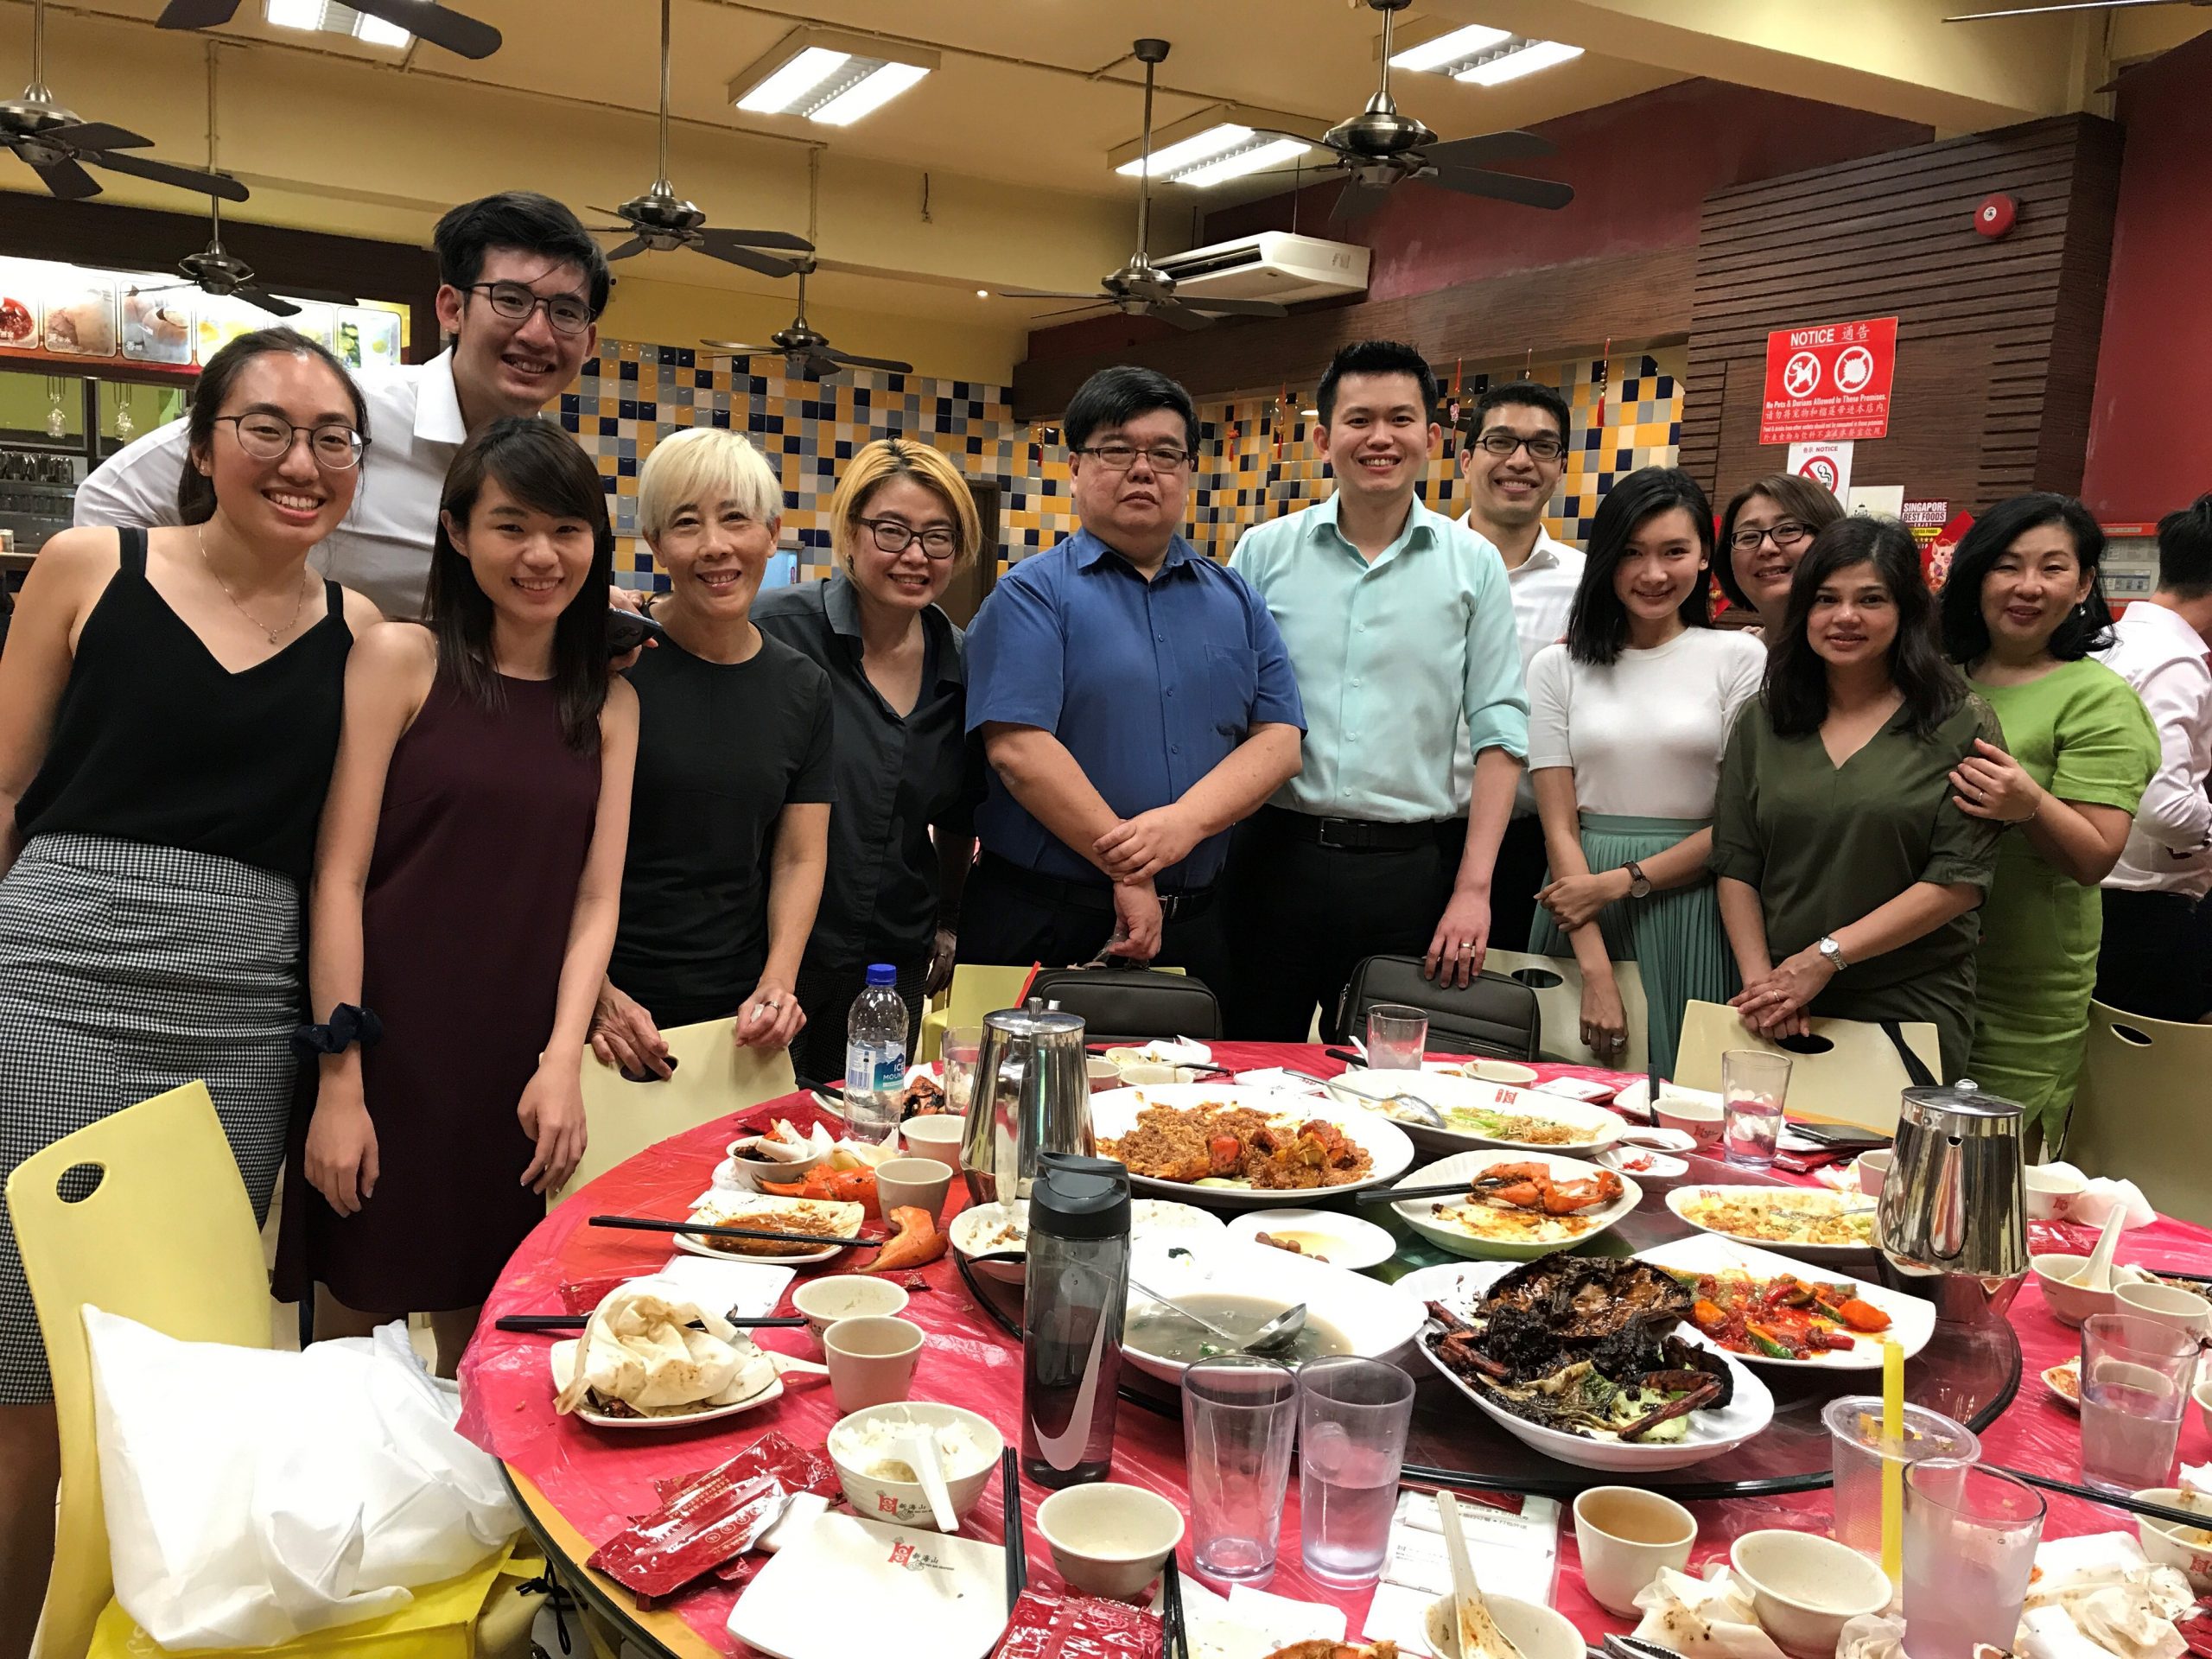 "Celebrating 100" dinnner with 2 affiliate firms OTP Law Corporation and @ PHY Law Corporation. Both firms shared their respective 100th case on our collaborative platform in 2018.